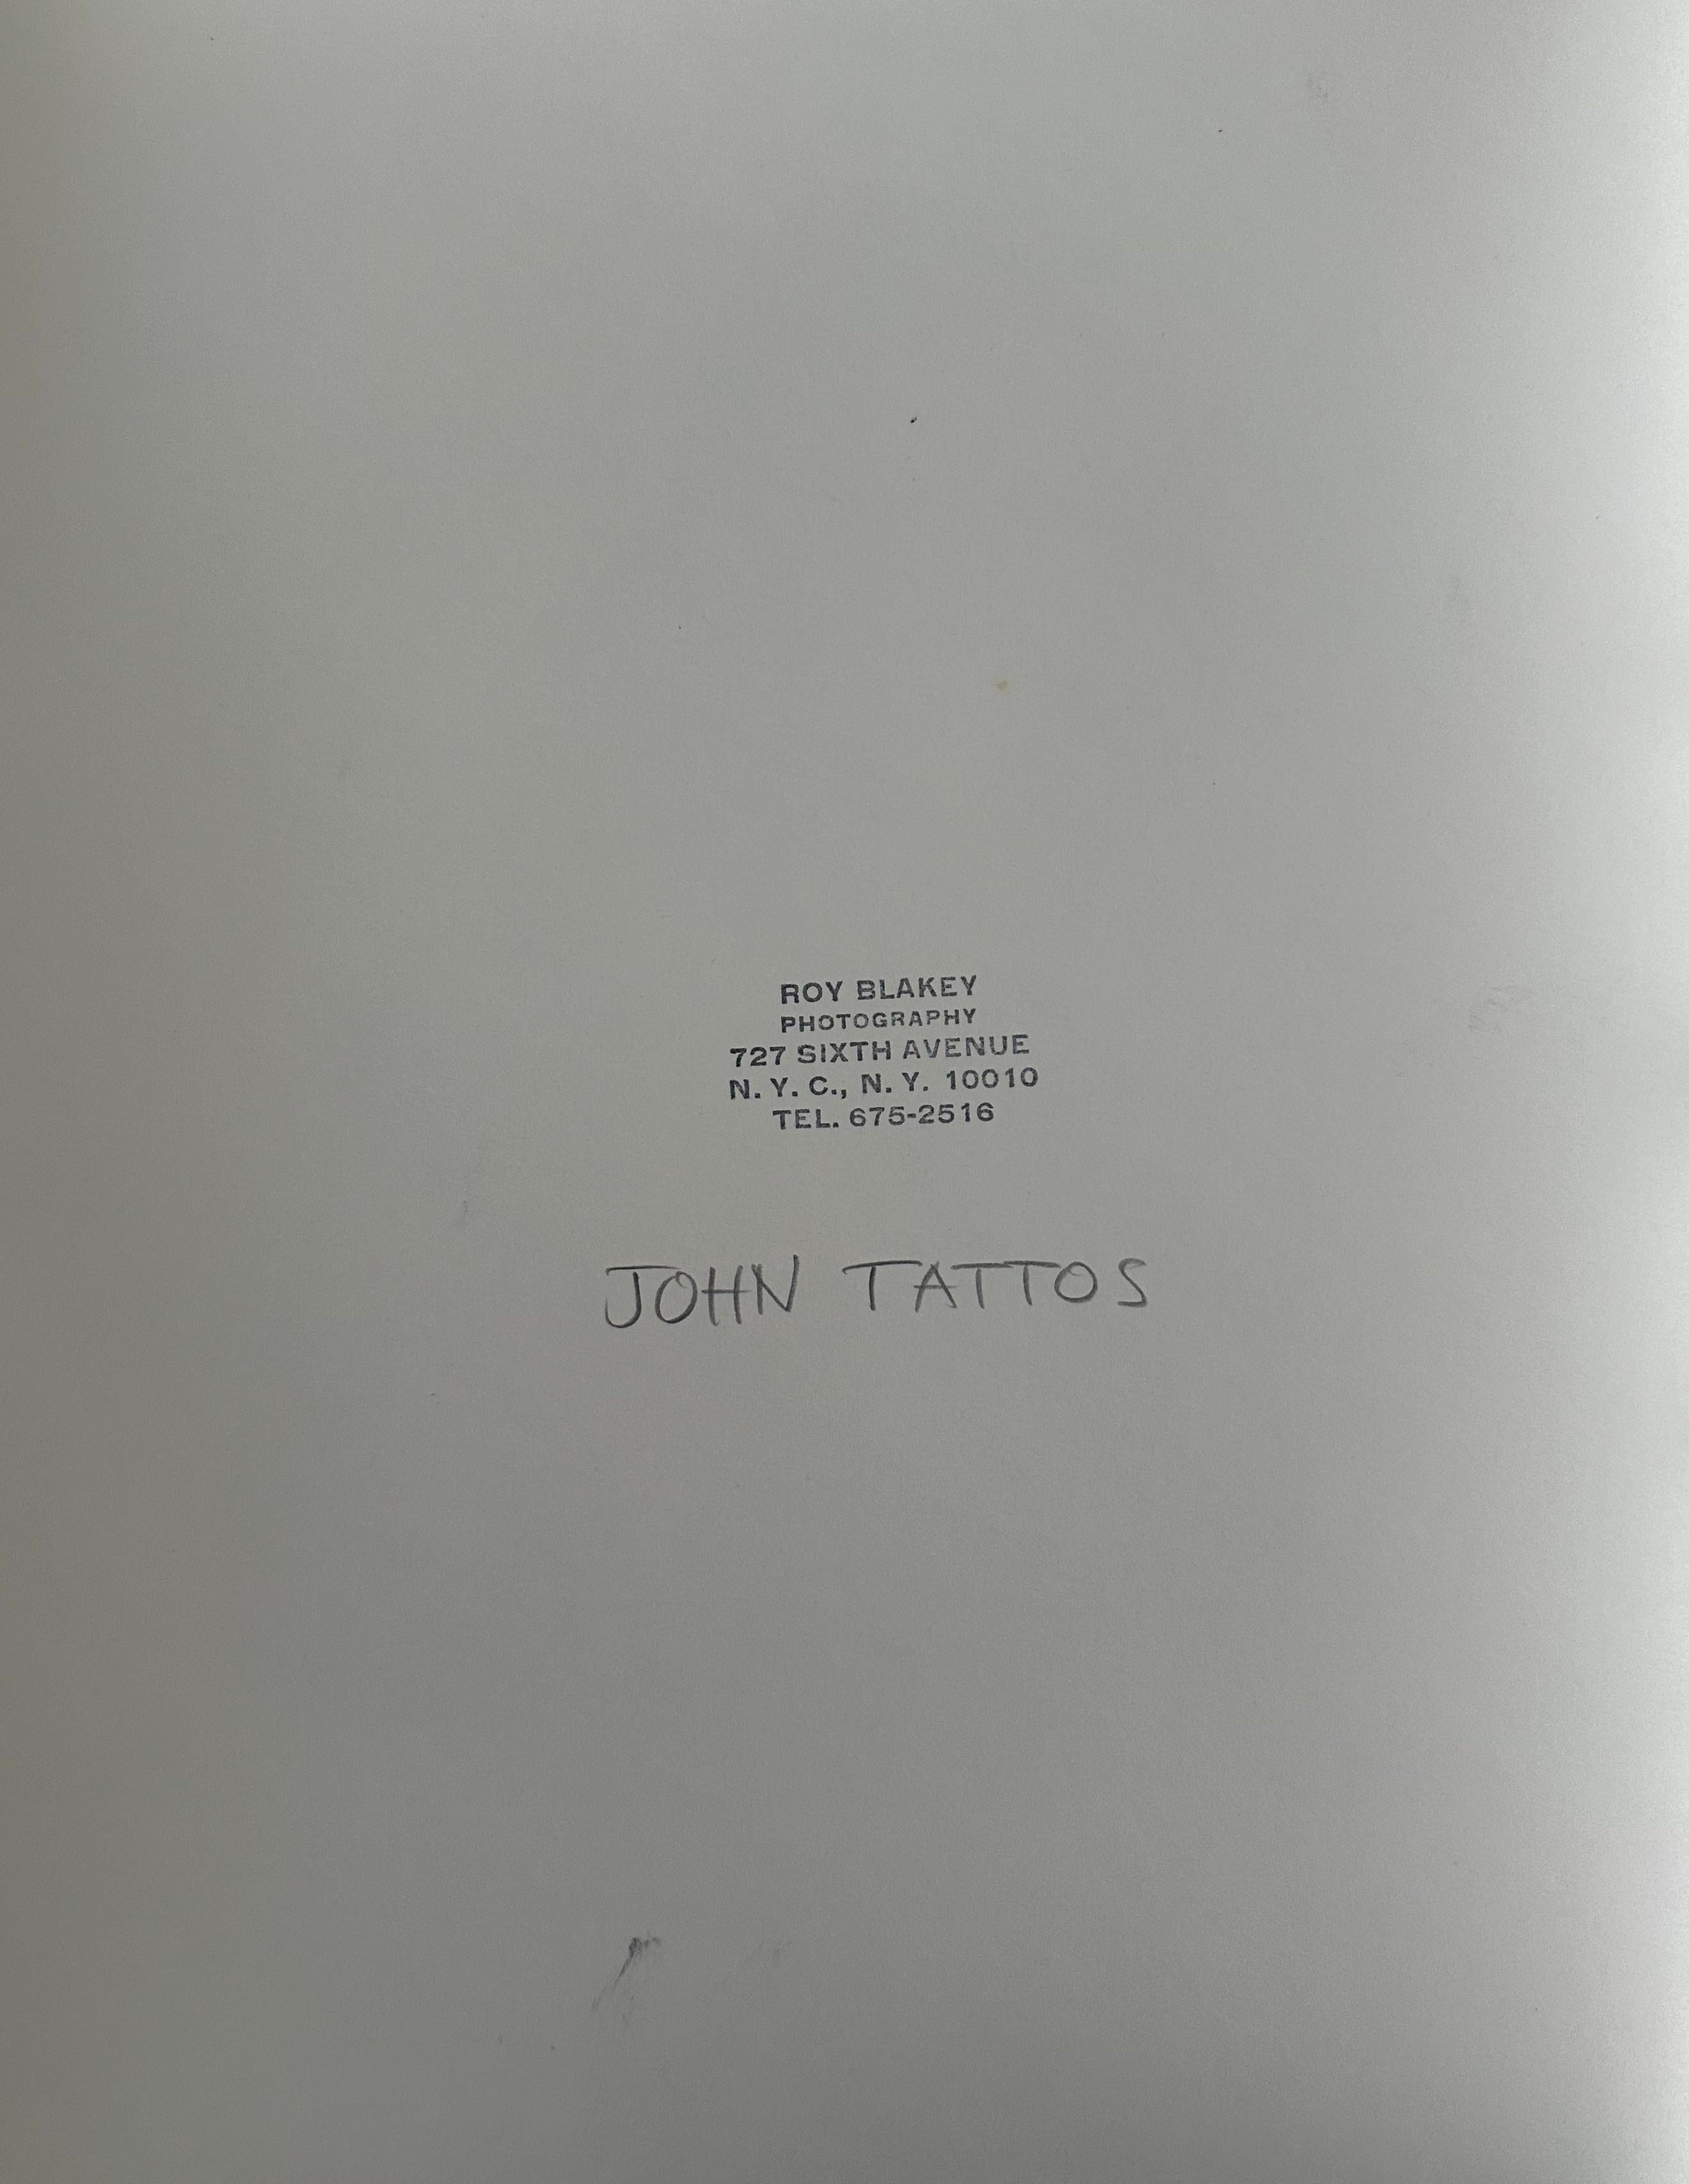 Roy Blakey (b.1930). Portrait of John Tattos, 1974. Original photographic print on paper, image measures 8.75 x 13 inches, sheet measures 12 x 16 inches. Measures 17 x 21 inches framed. Studio stamp on verso. 

A different image from this photo